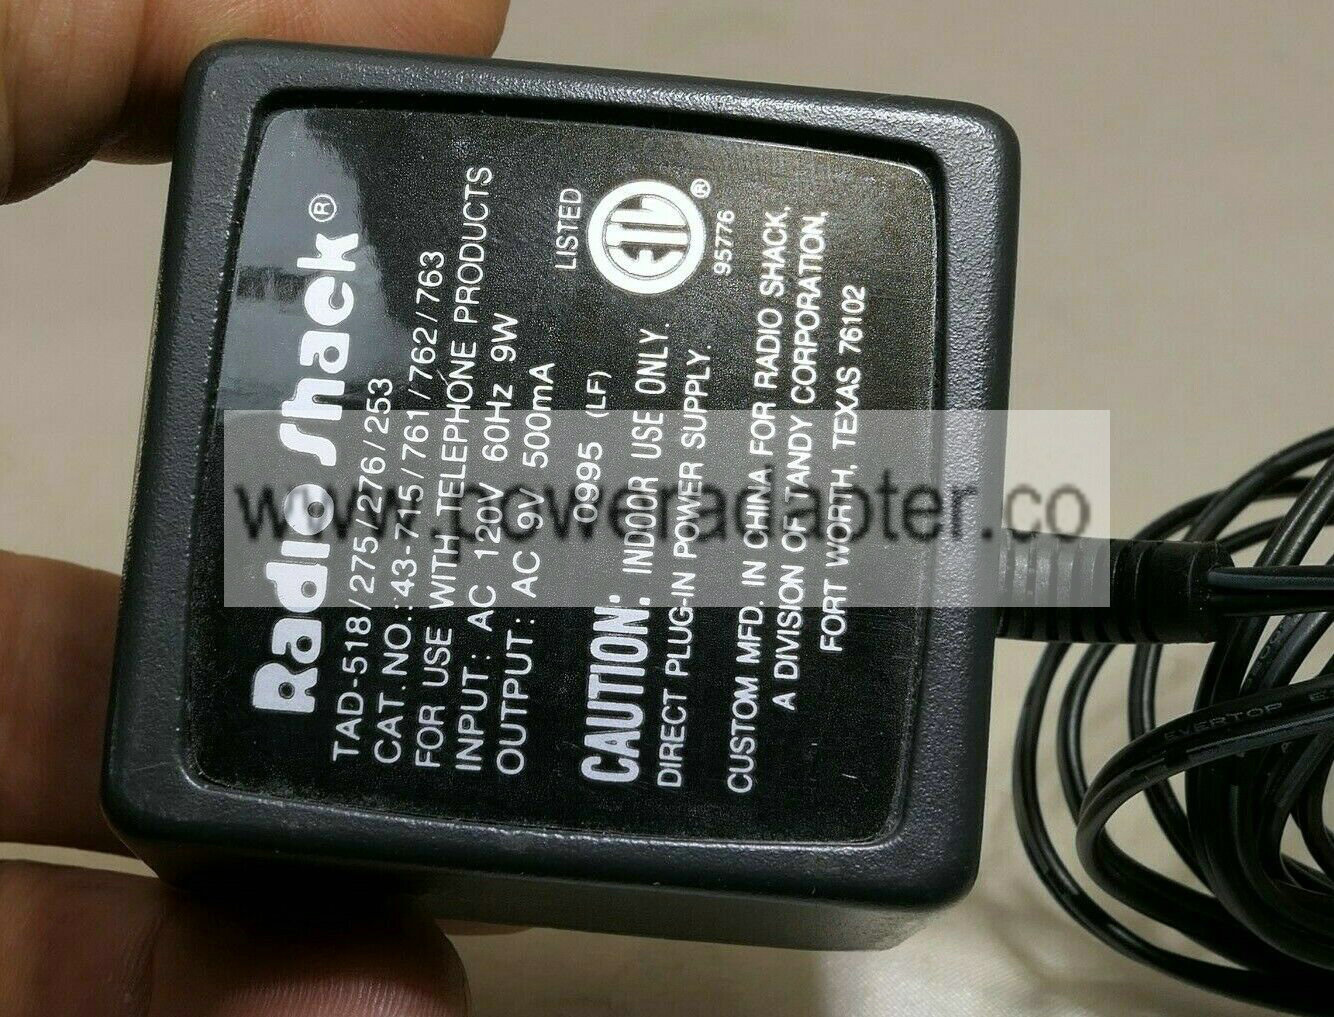 Radio Shack AC Adapter Power Supply cat no 43-715 761-62-63 for telephone phone it works good. End OD is 5.5mm. It w - Click Image to Close